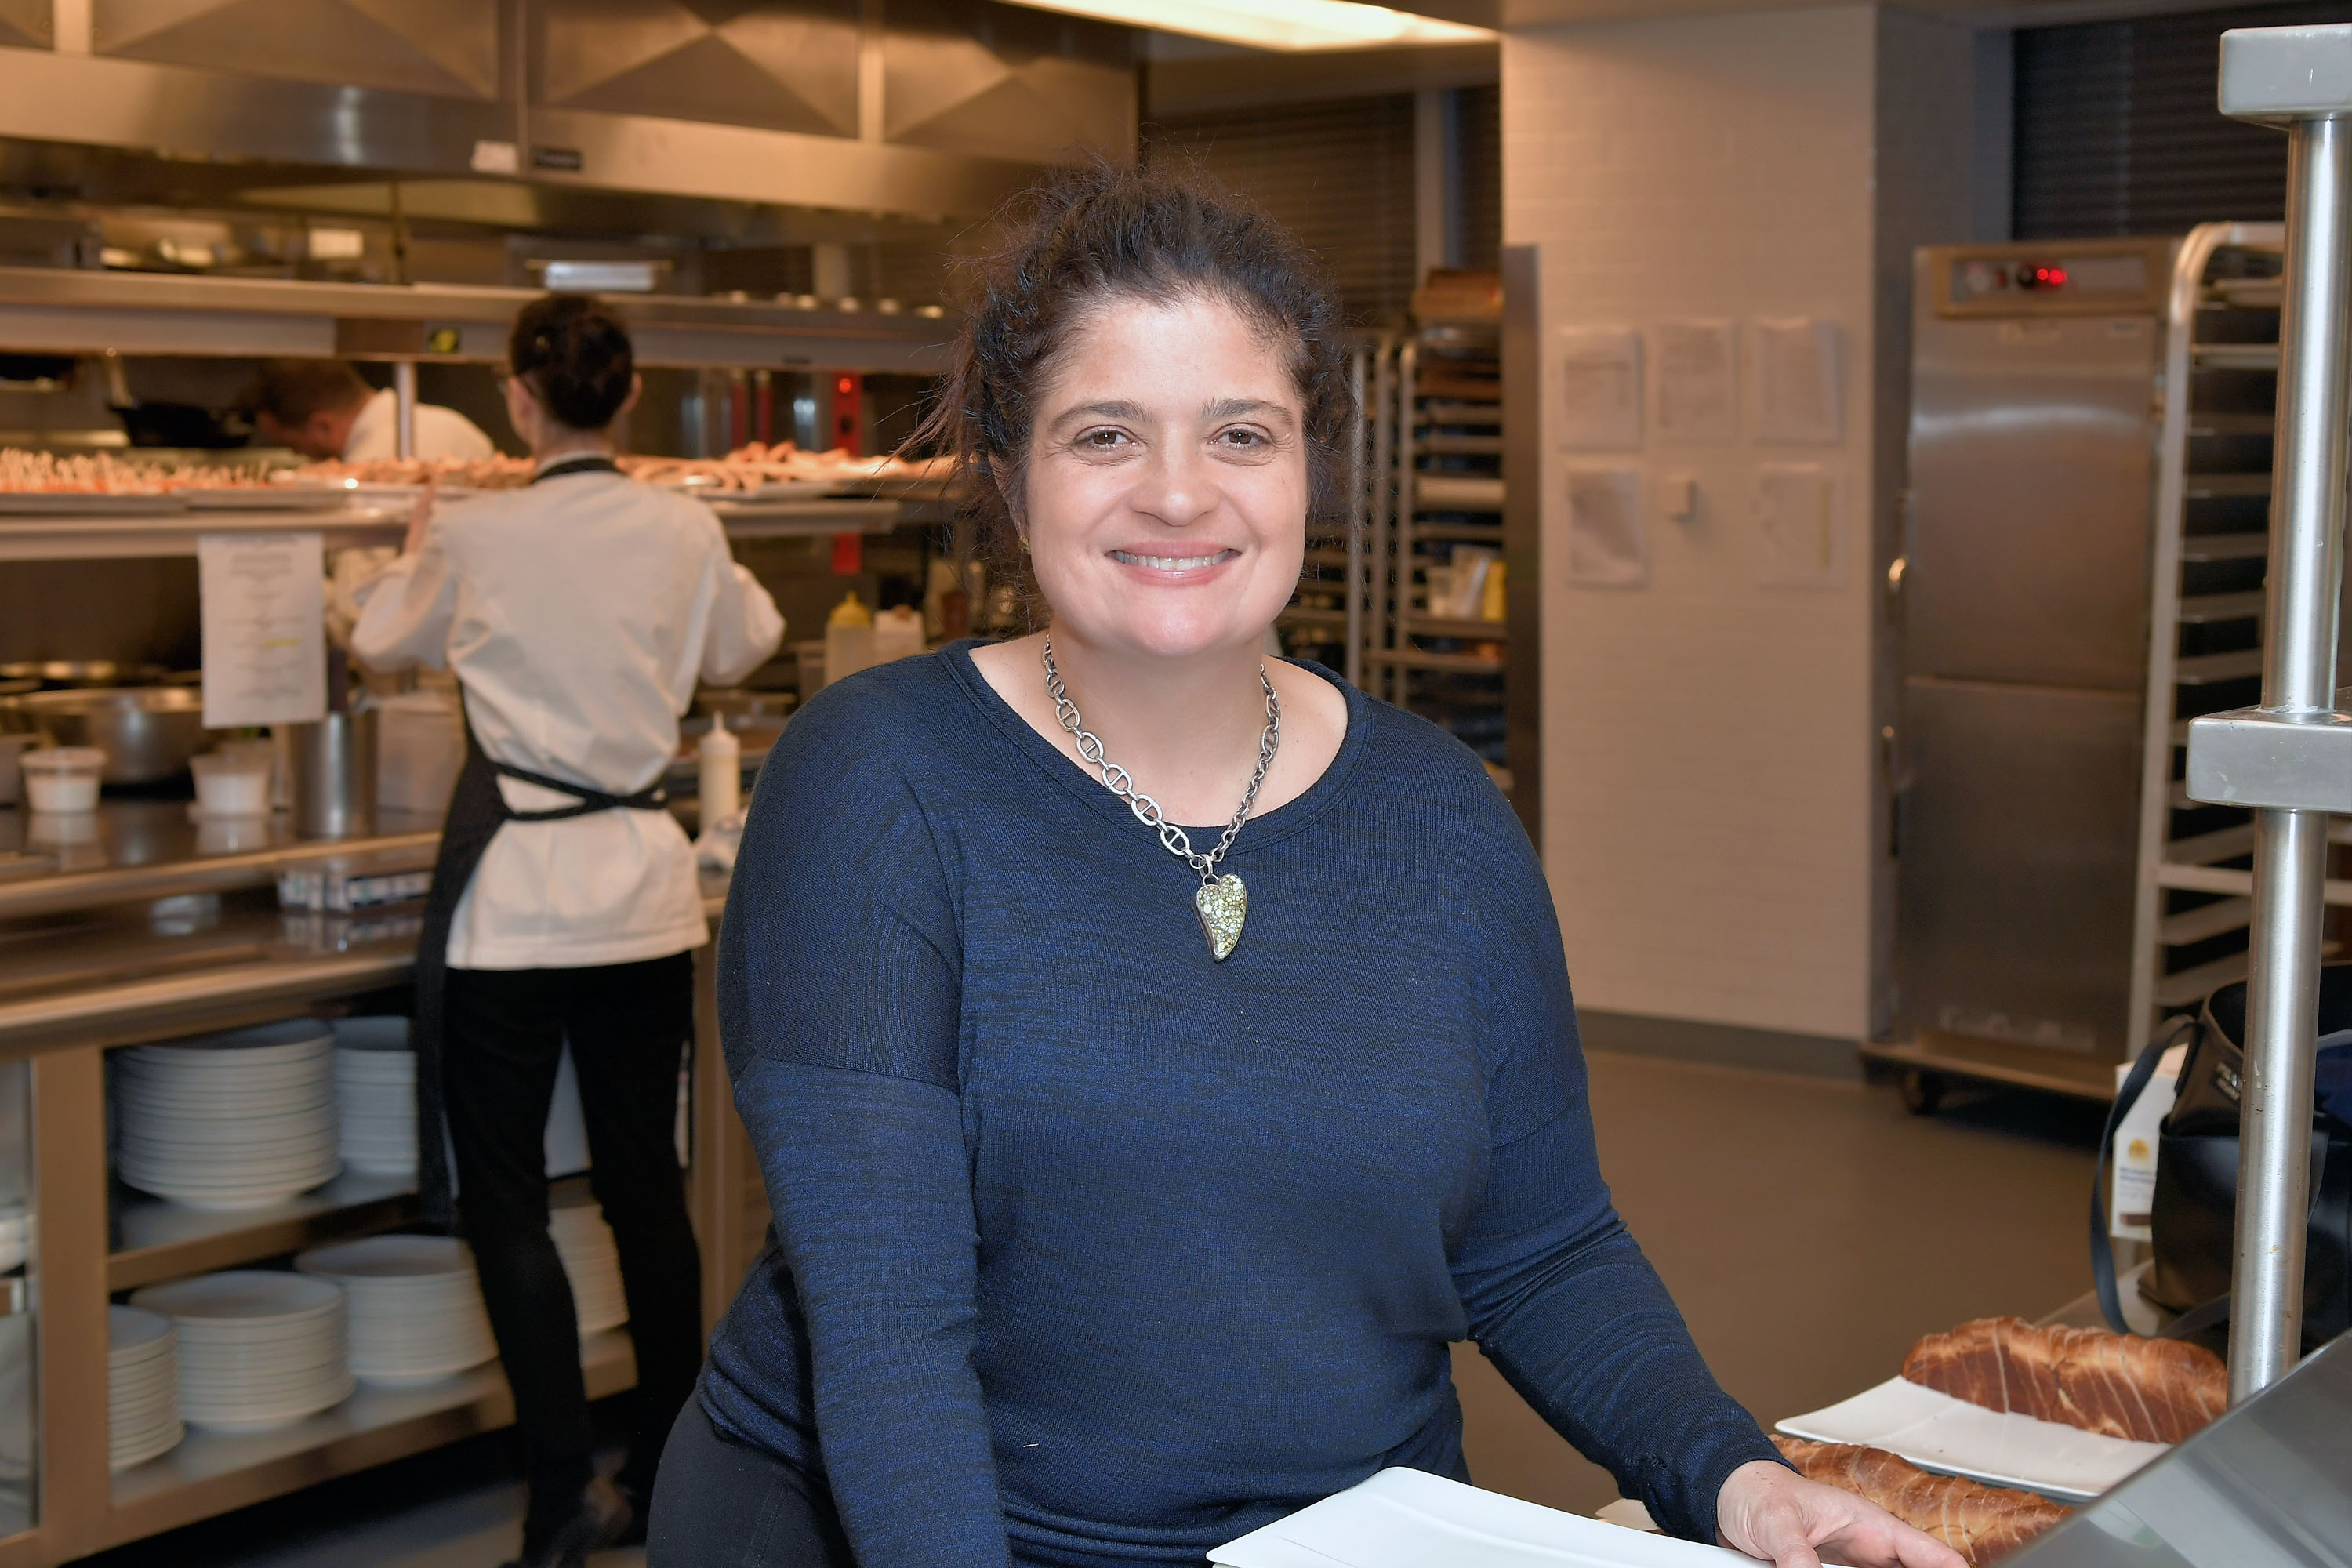 Celebrity chef Alex Guarnaschelli wears a long-sleeved blue blouse in this photograph.